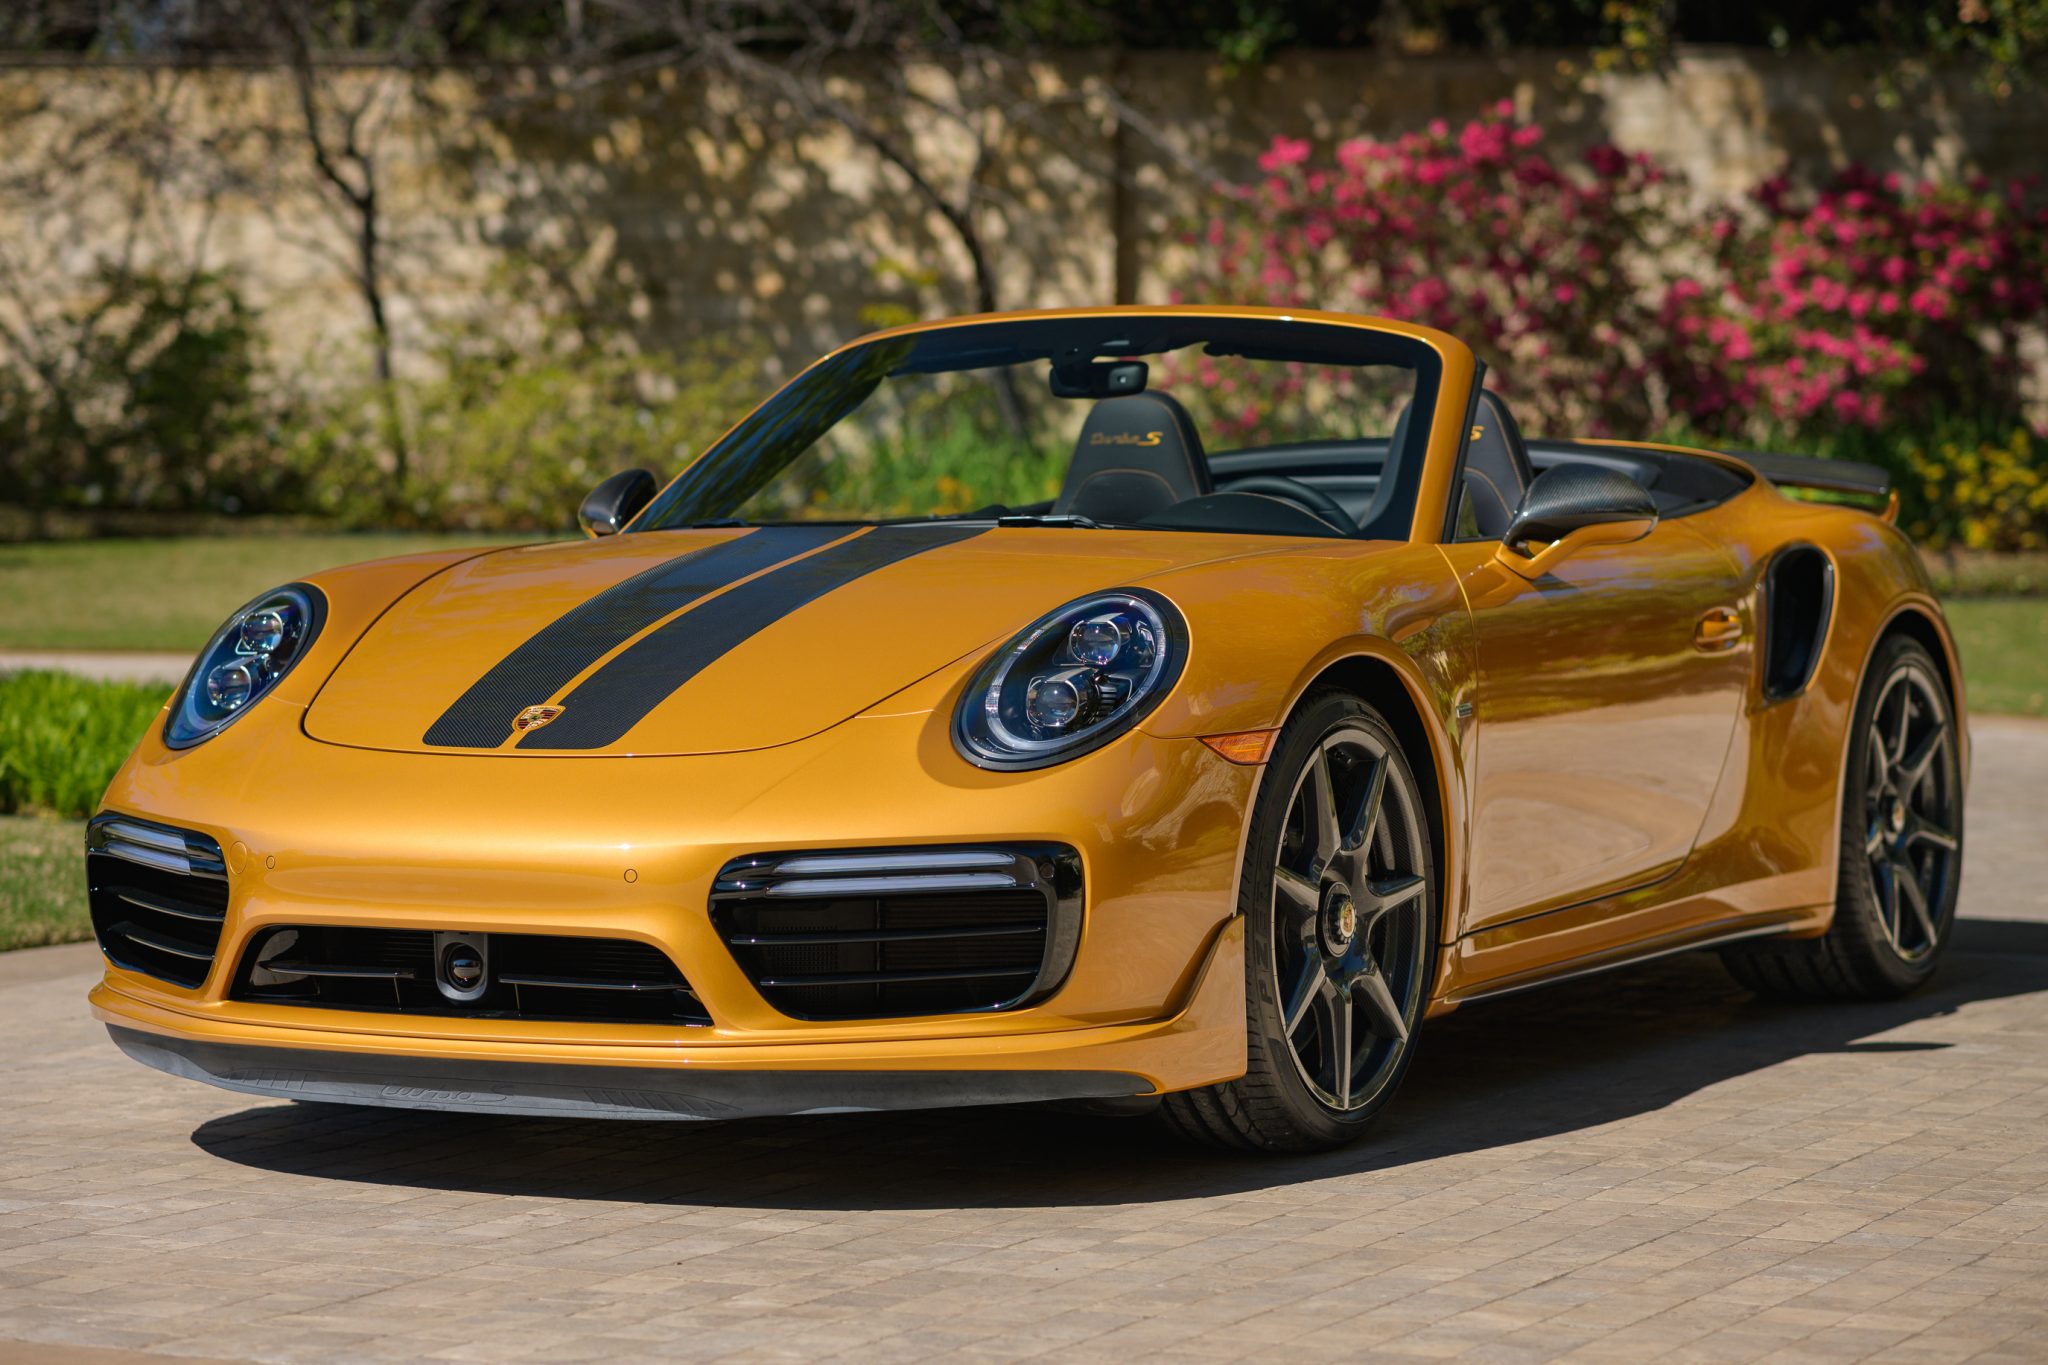 Used 24-Mile 2019 Porsche 911 Turbo S Cabriolet Exclusive Series Review